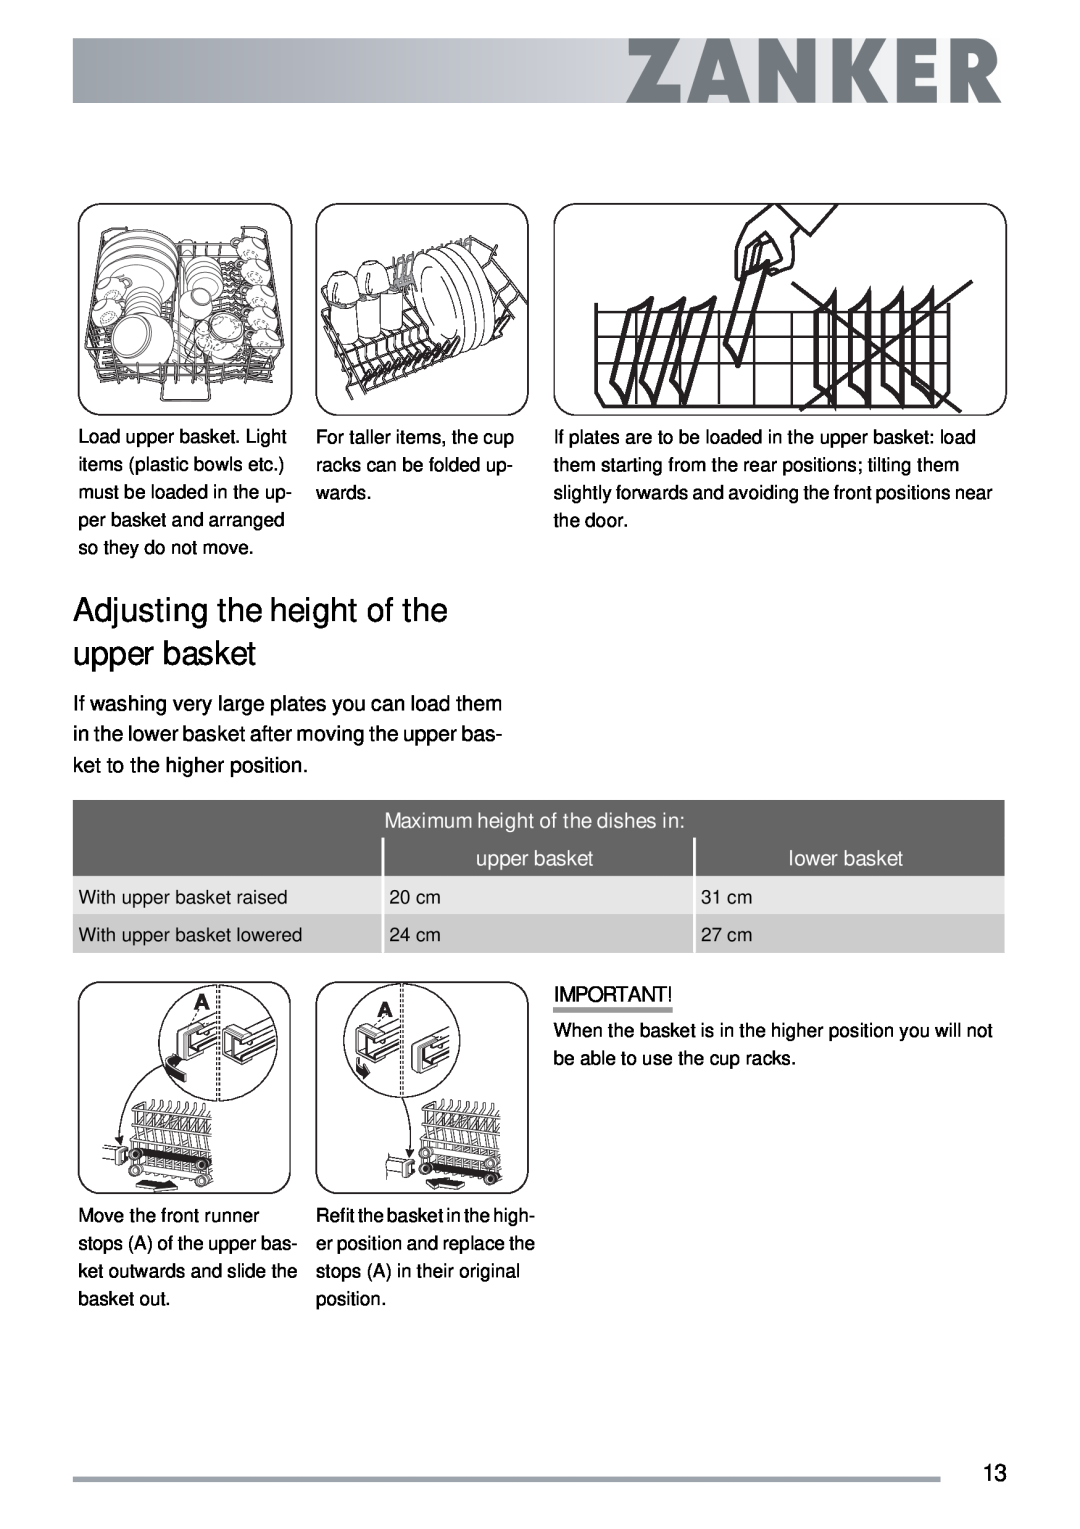 Electrolux ZKI1410 user manual Adjusting the height of the upper basket, Maximum height of the dishes in, lower basket 